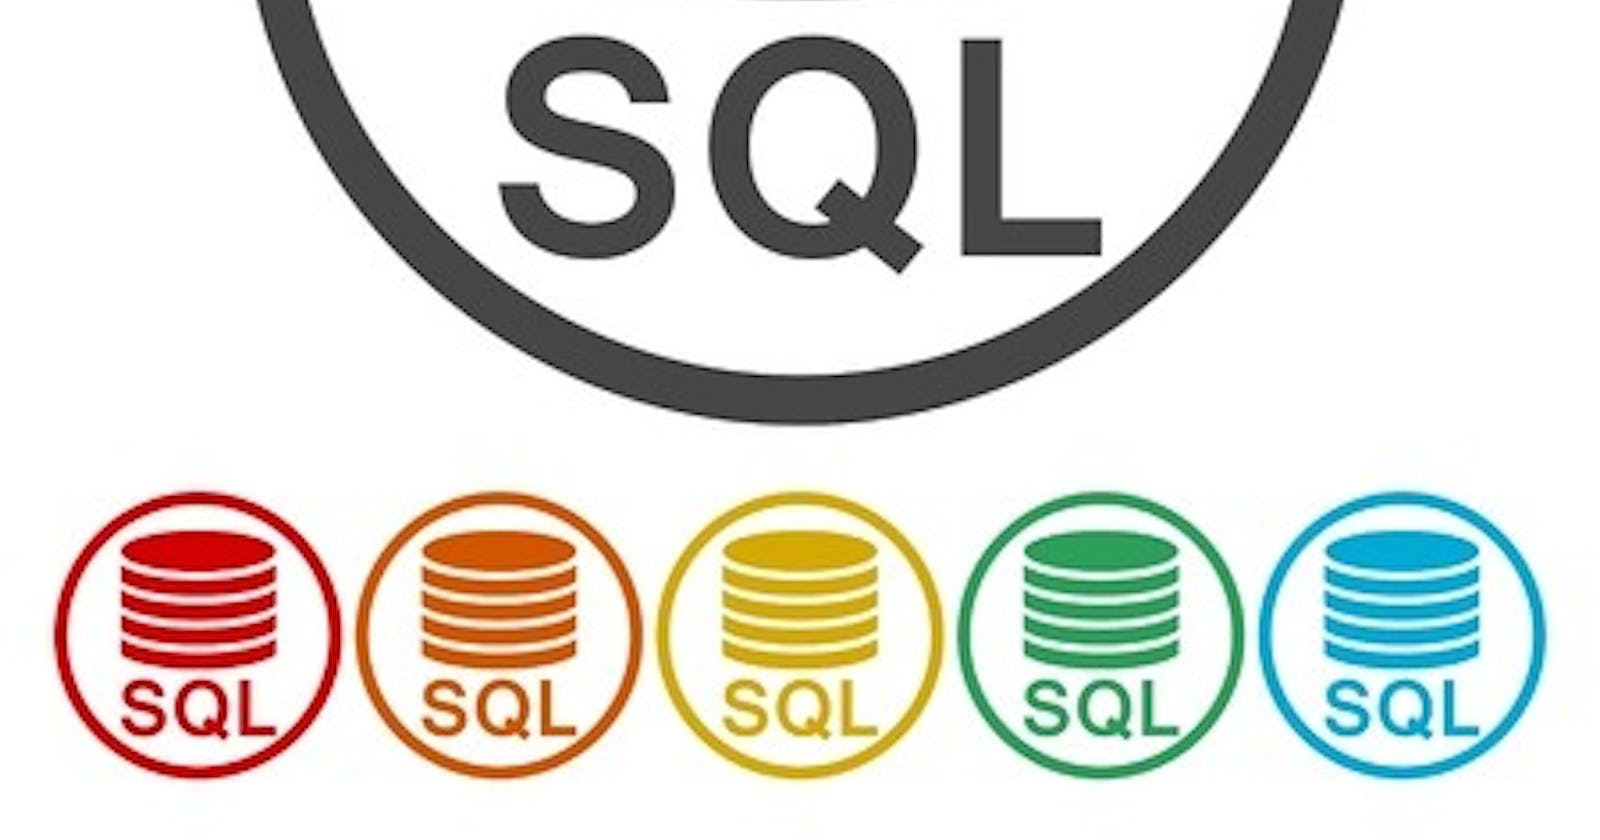 "A Beginners Guide to Structured Query Language (SQL)"